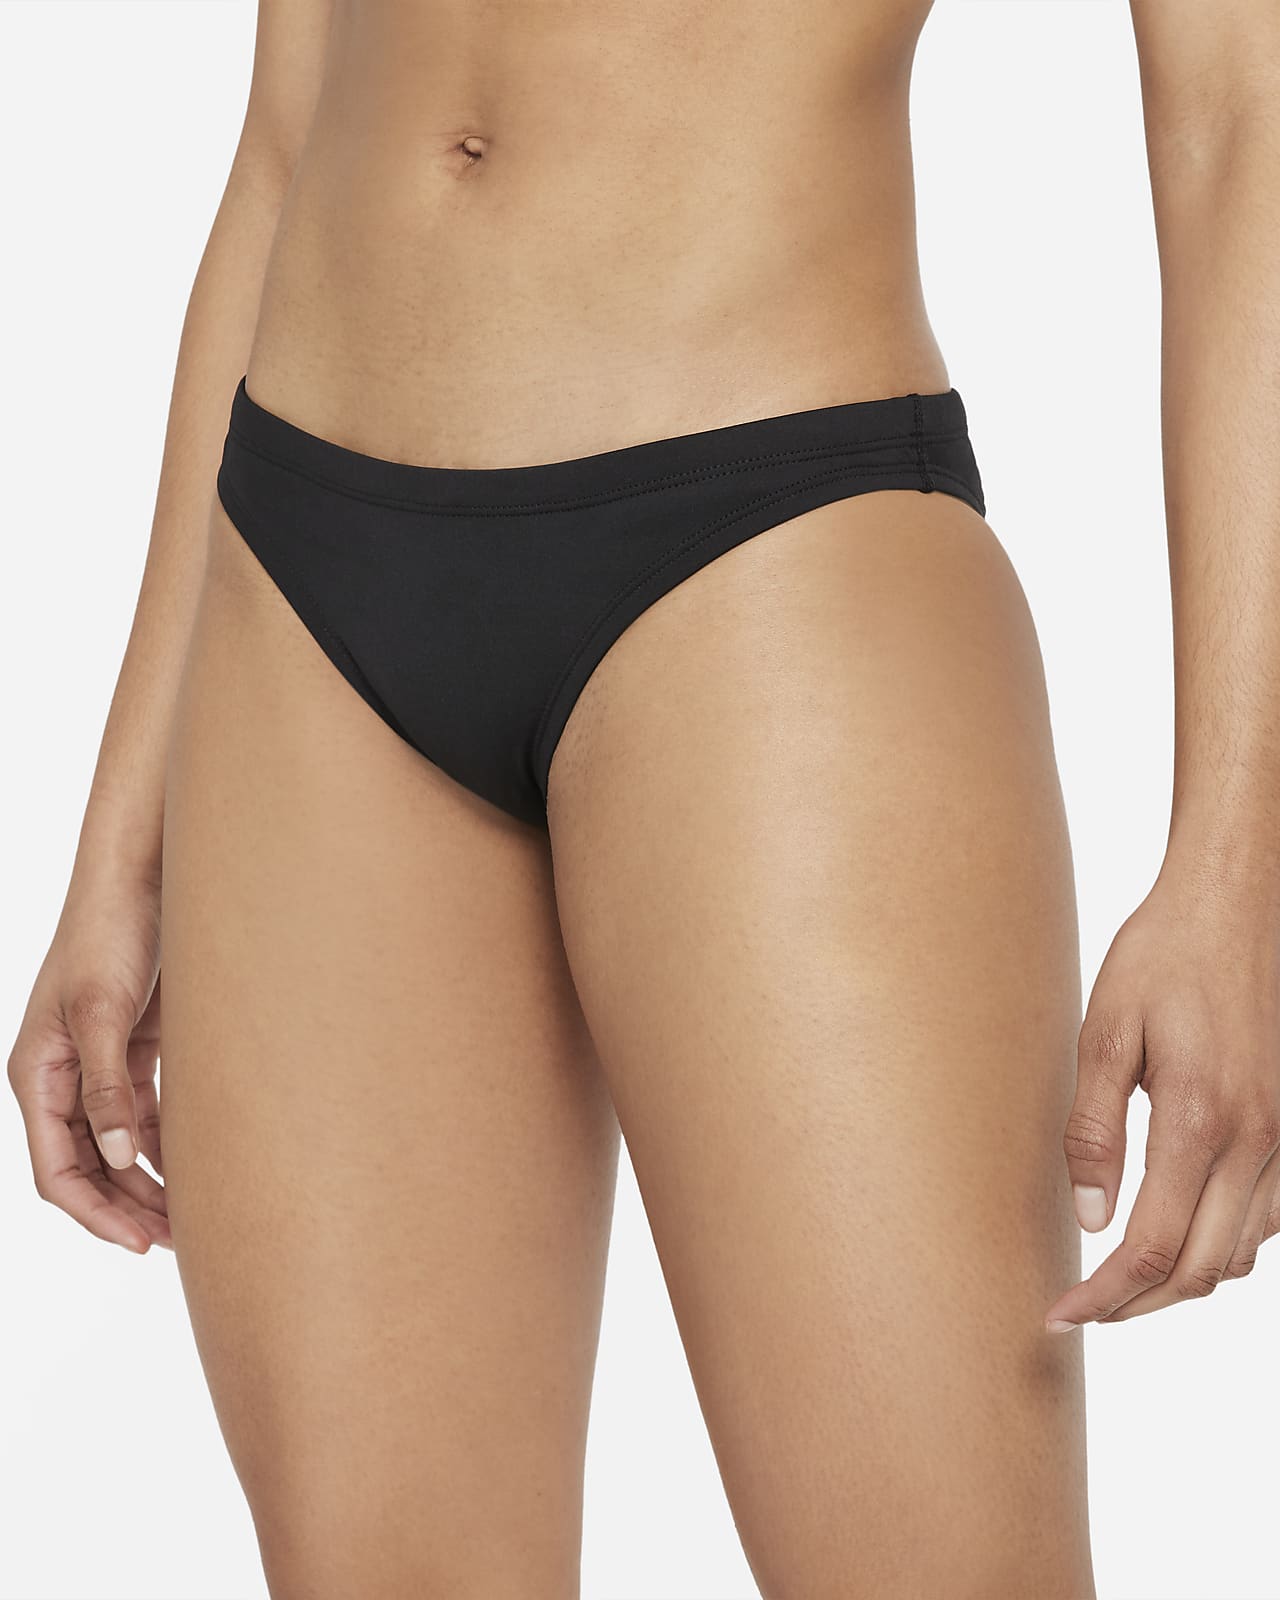 Nike Essential Women's High-Waisted Swimming Bottoms. Nike UK